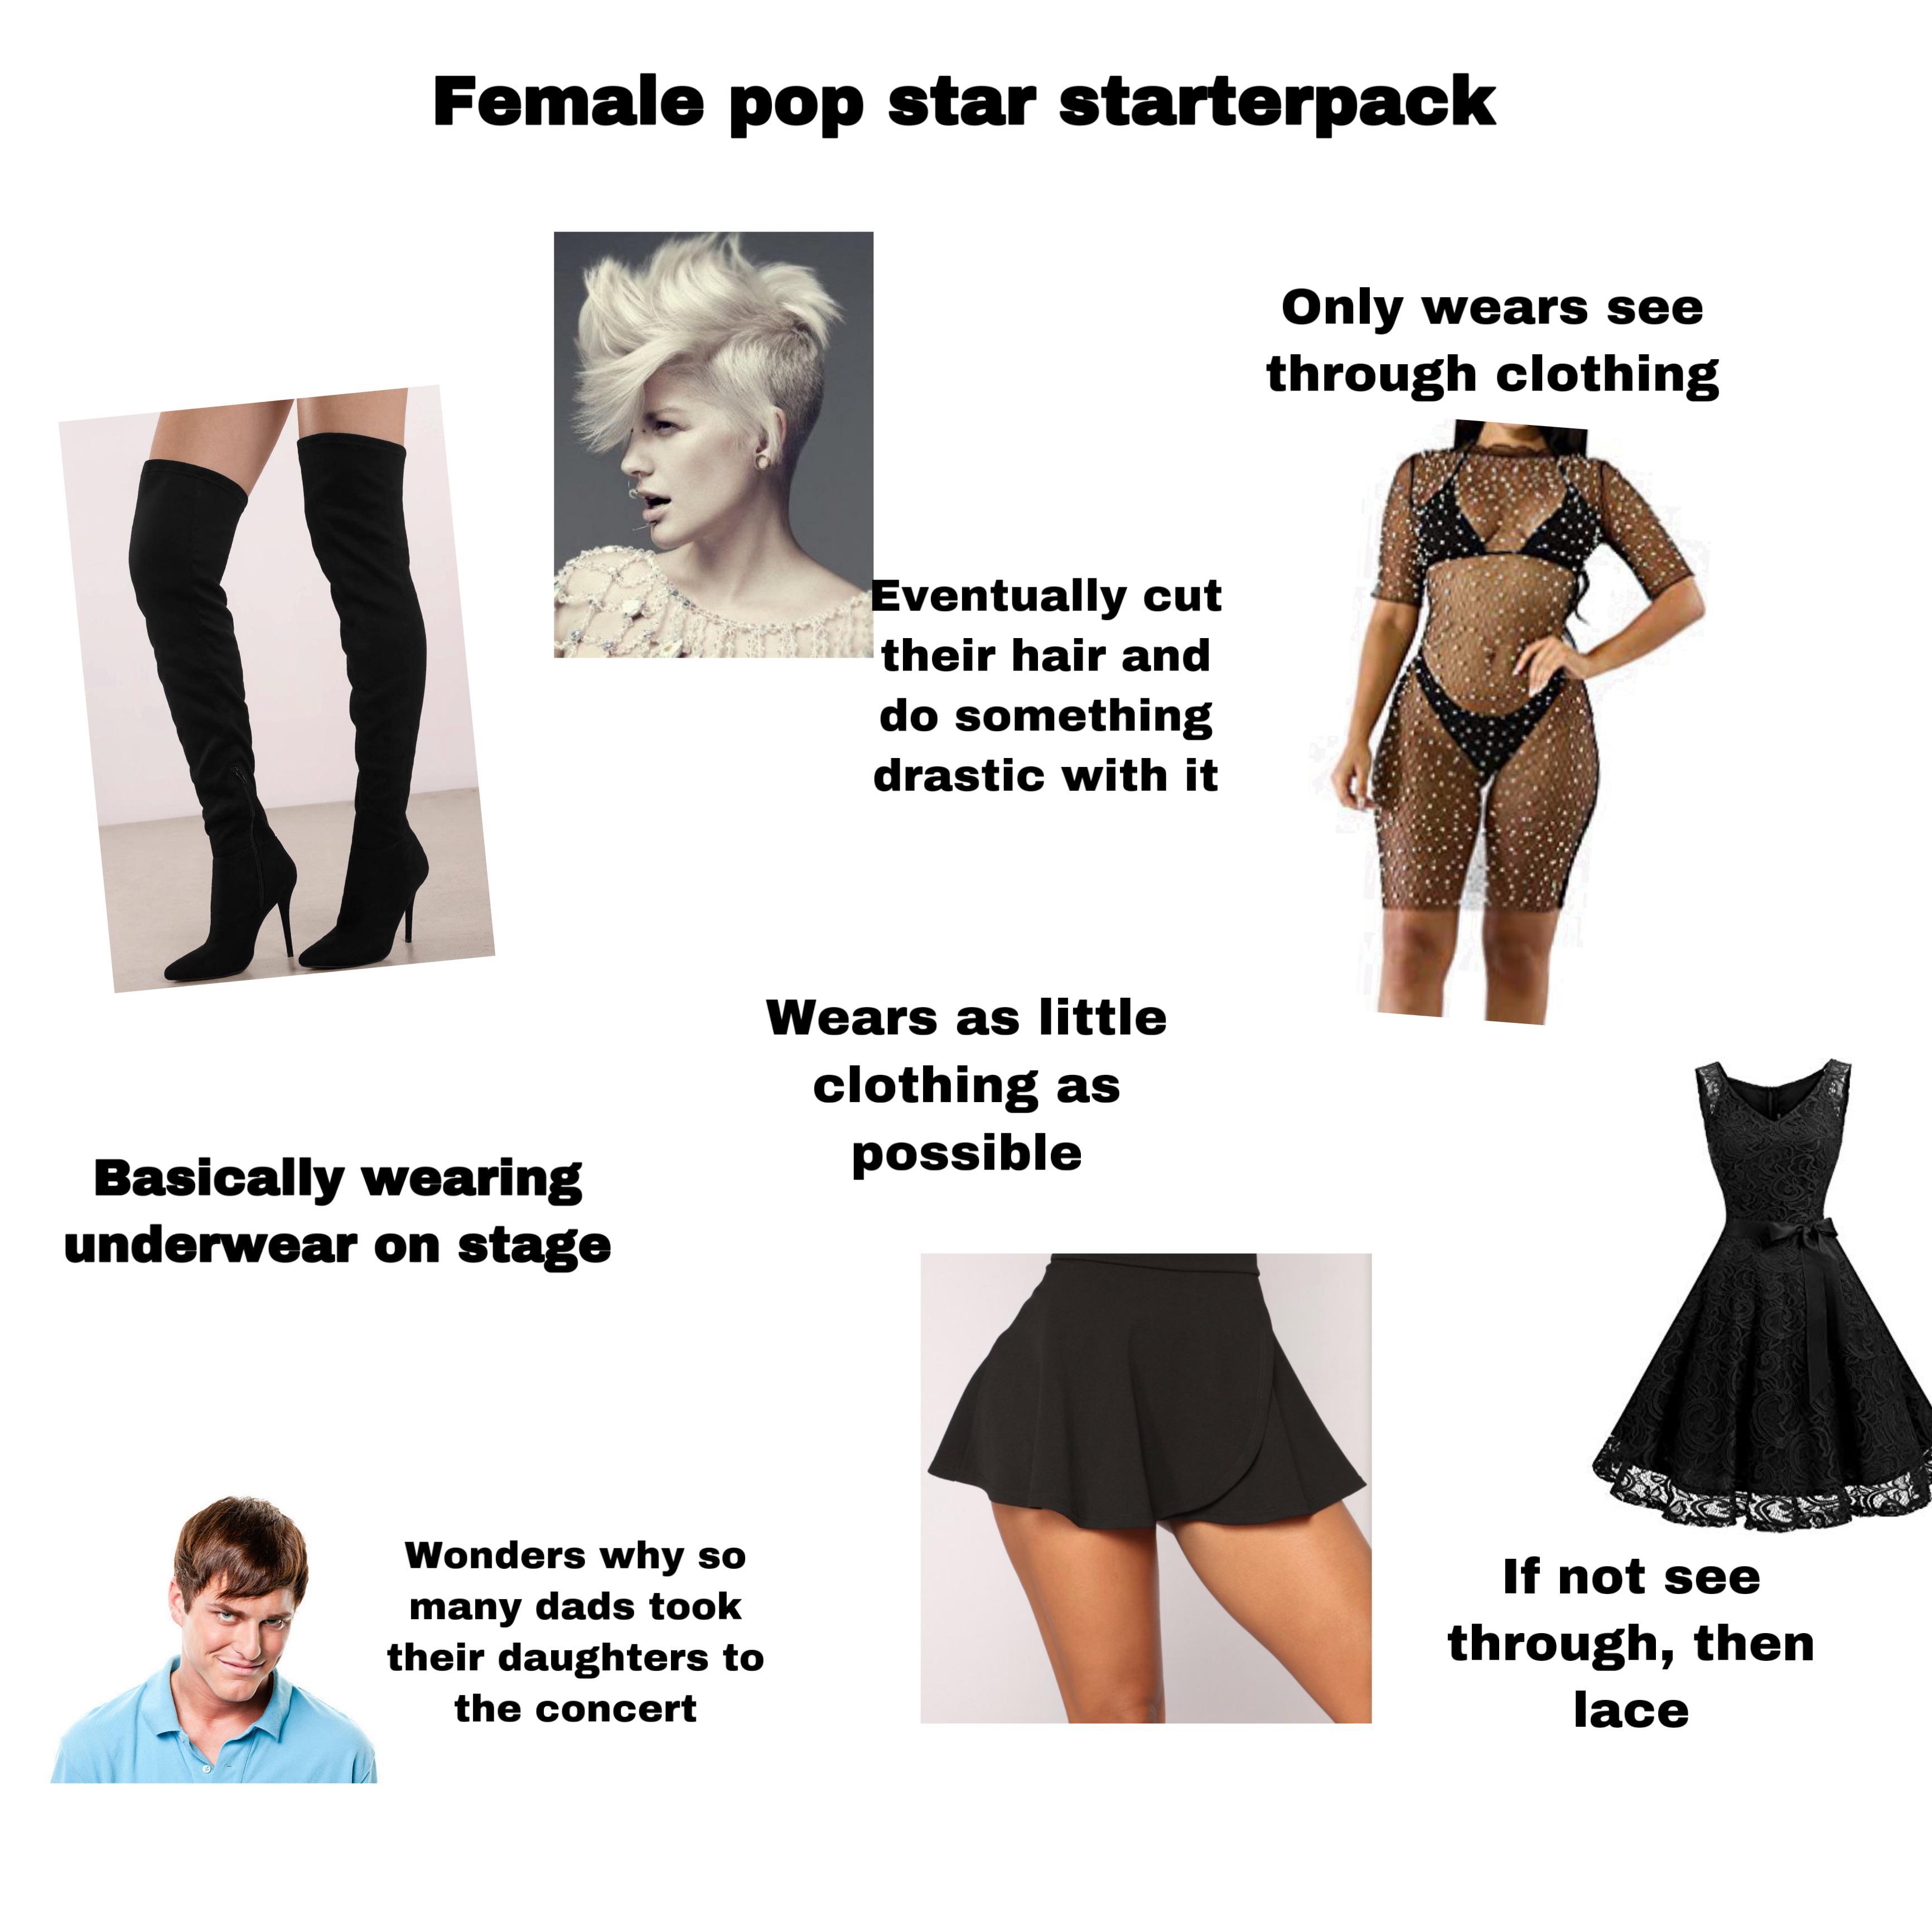 Starter Pack Meme - Female pop star starterpack Only wears see through clothing Eventually cut their hair and do something drastic with it Wears as little clothing as possible Basically wearing underwear on stage Wonders why so many dads took their daught